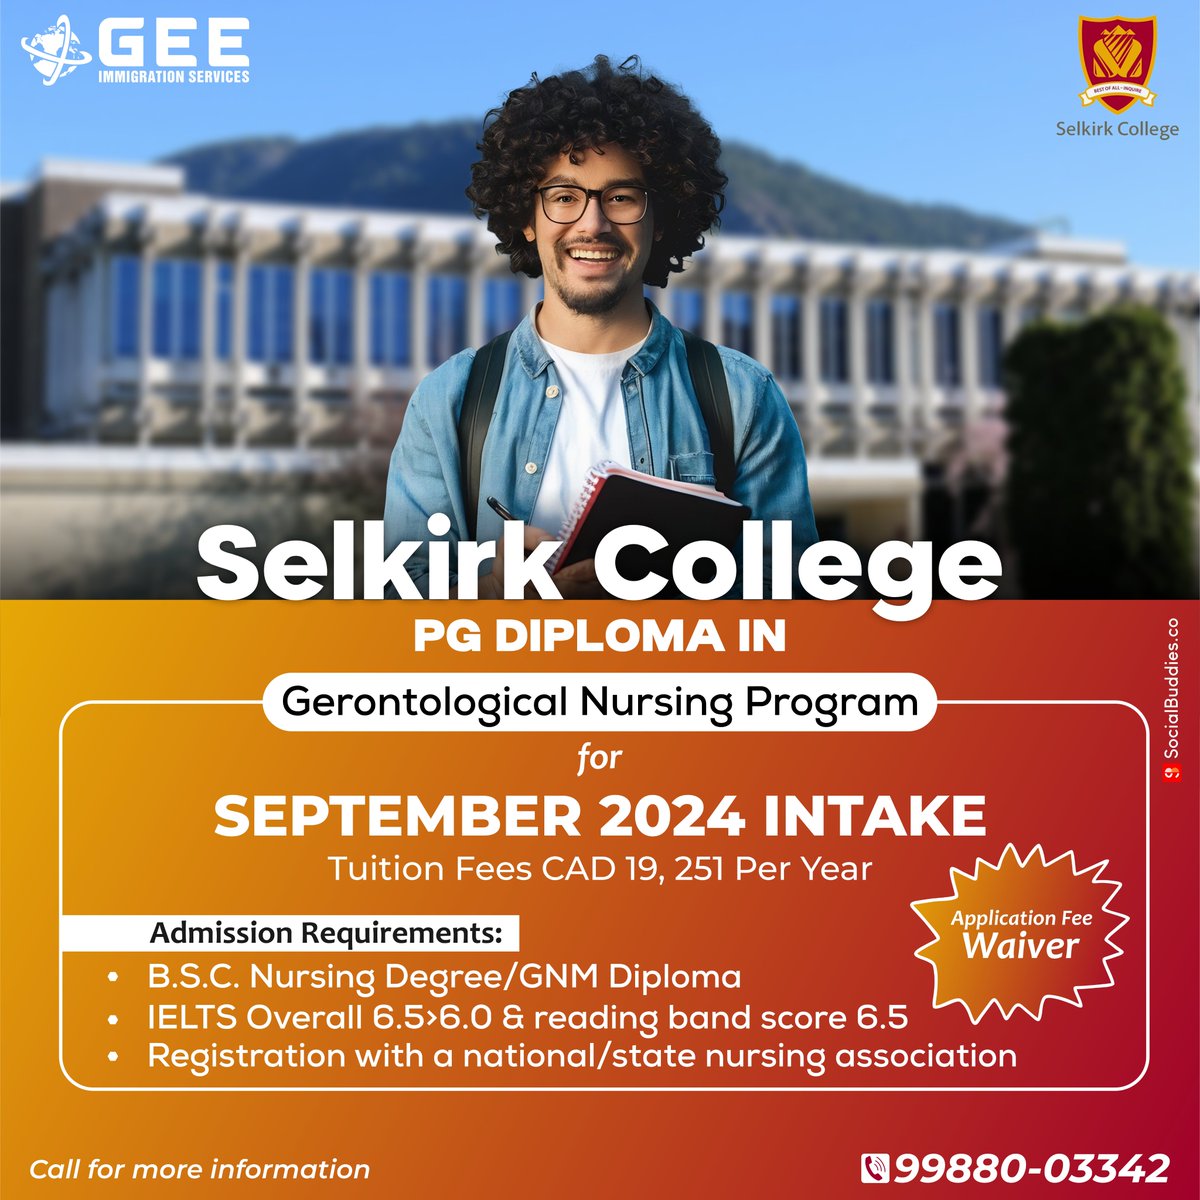 Set your career by studying at Selkirk College in Canada.
.
🚀 For more info, dial +91 9988003310 or +91 9988003342.
.
#studyvisa #studyincanada #studyabroad #newjourney #immigrationlawyer #fastprocessing #studyoverseas #immigrationexperts #gurpreetwander #geeimmigrationbathinda